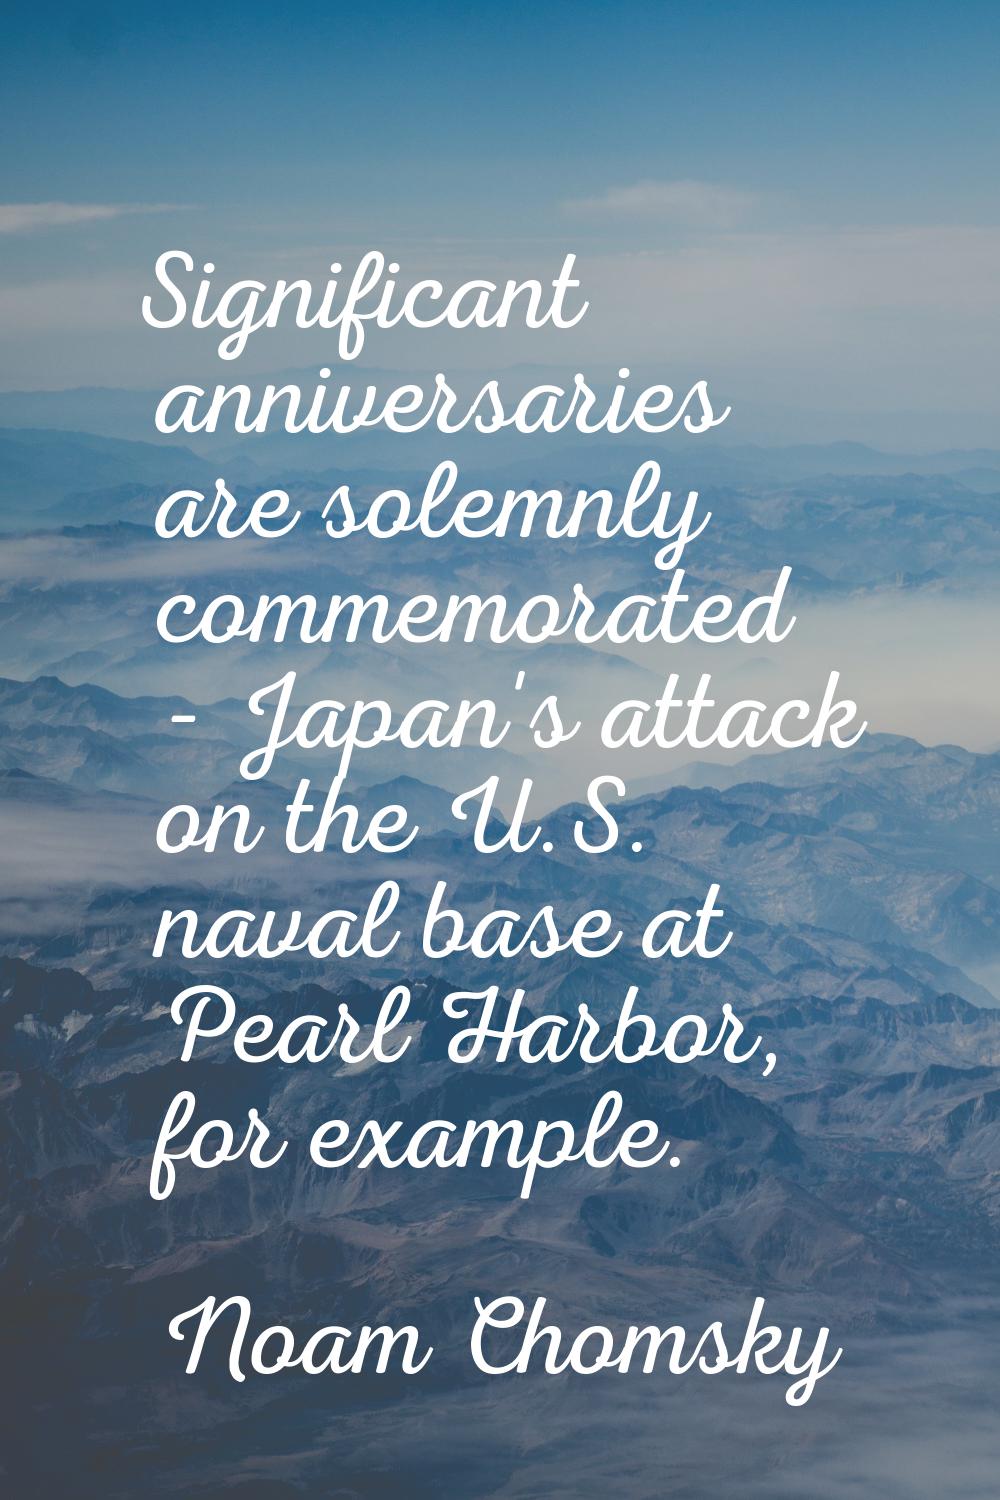 Significant anniversaries are solemnly commemorated - Japan's attack on the U.S. naval base at Pear